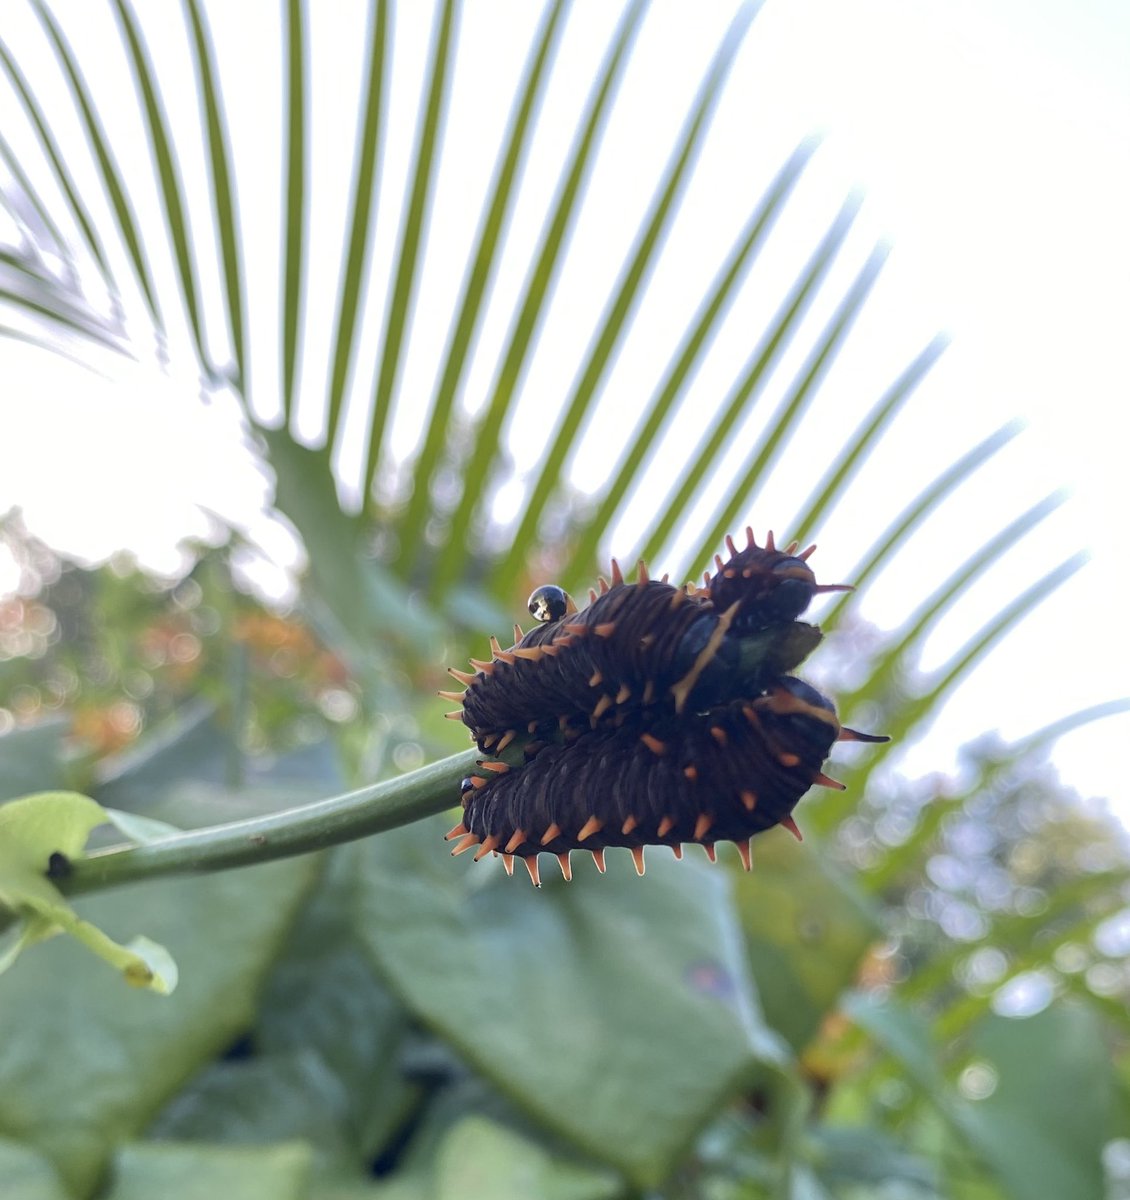 Before work makes me grumpy, I visited my pollinator garden and found lots of these 🐛 That’s 3 of them huddled on one branch. FL sunshine and bugs FTW #pipevineswallowtail #pollinatorsareimportant